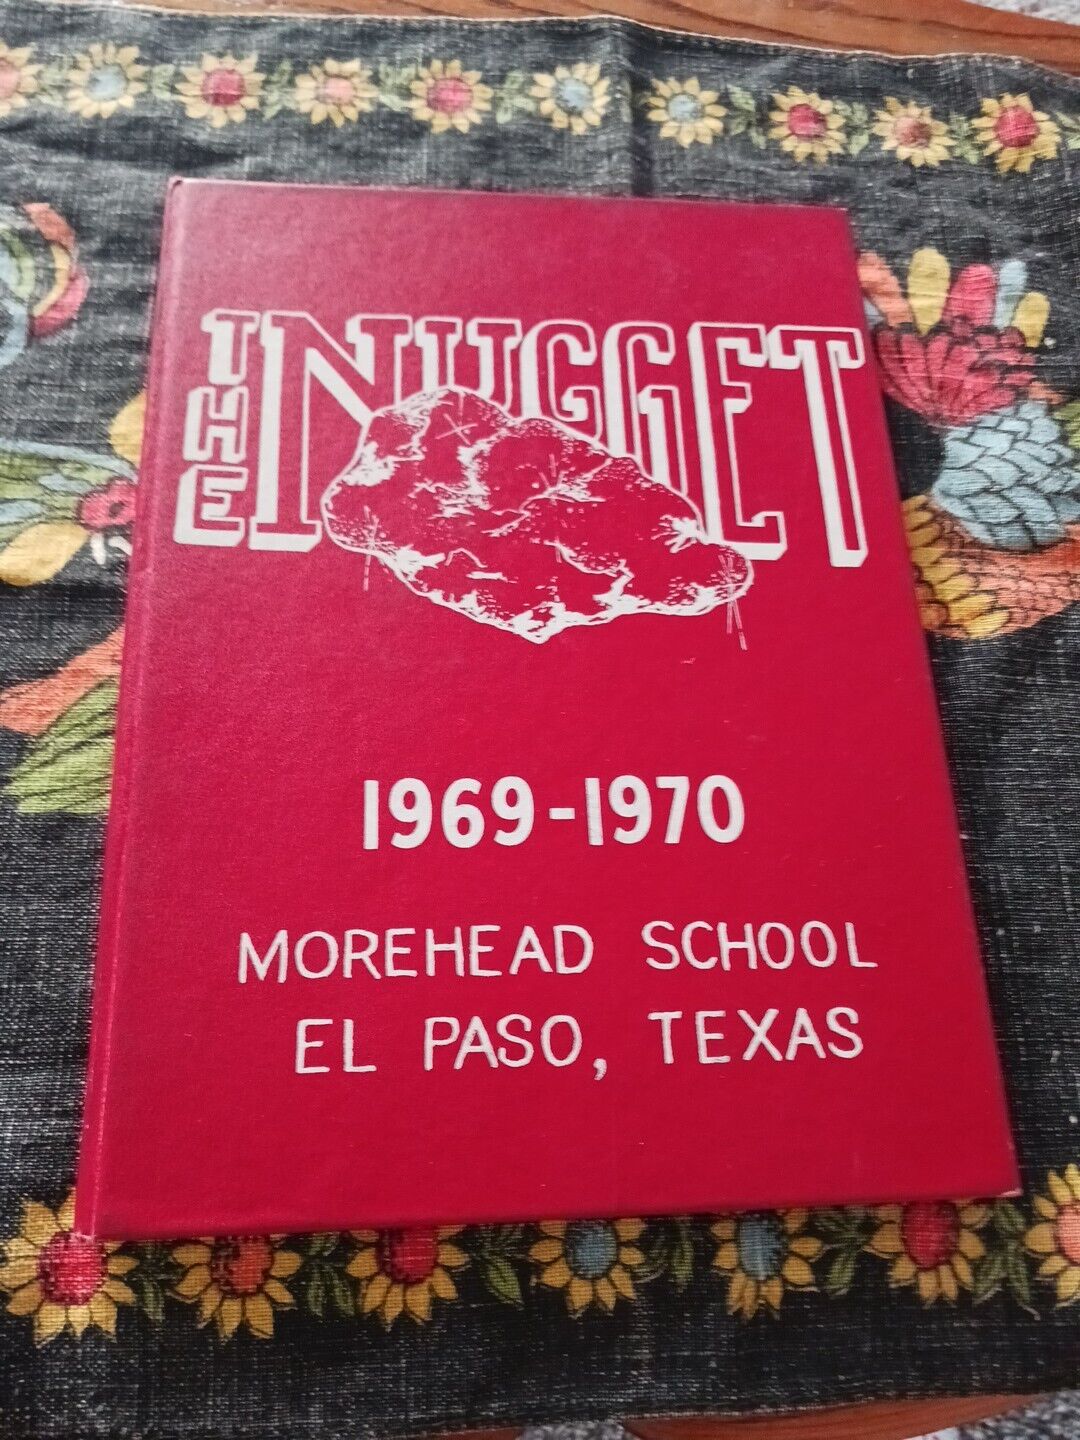 Vtg Yearbook The Nugget Morehead Middle School El Paso Texas Annual 1969 1970